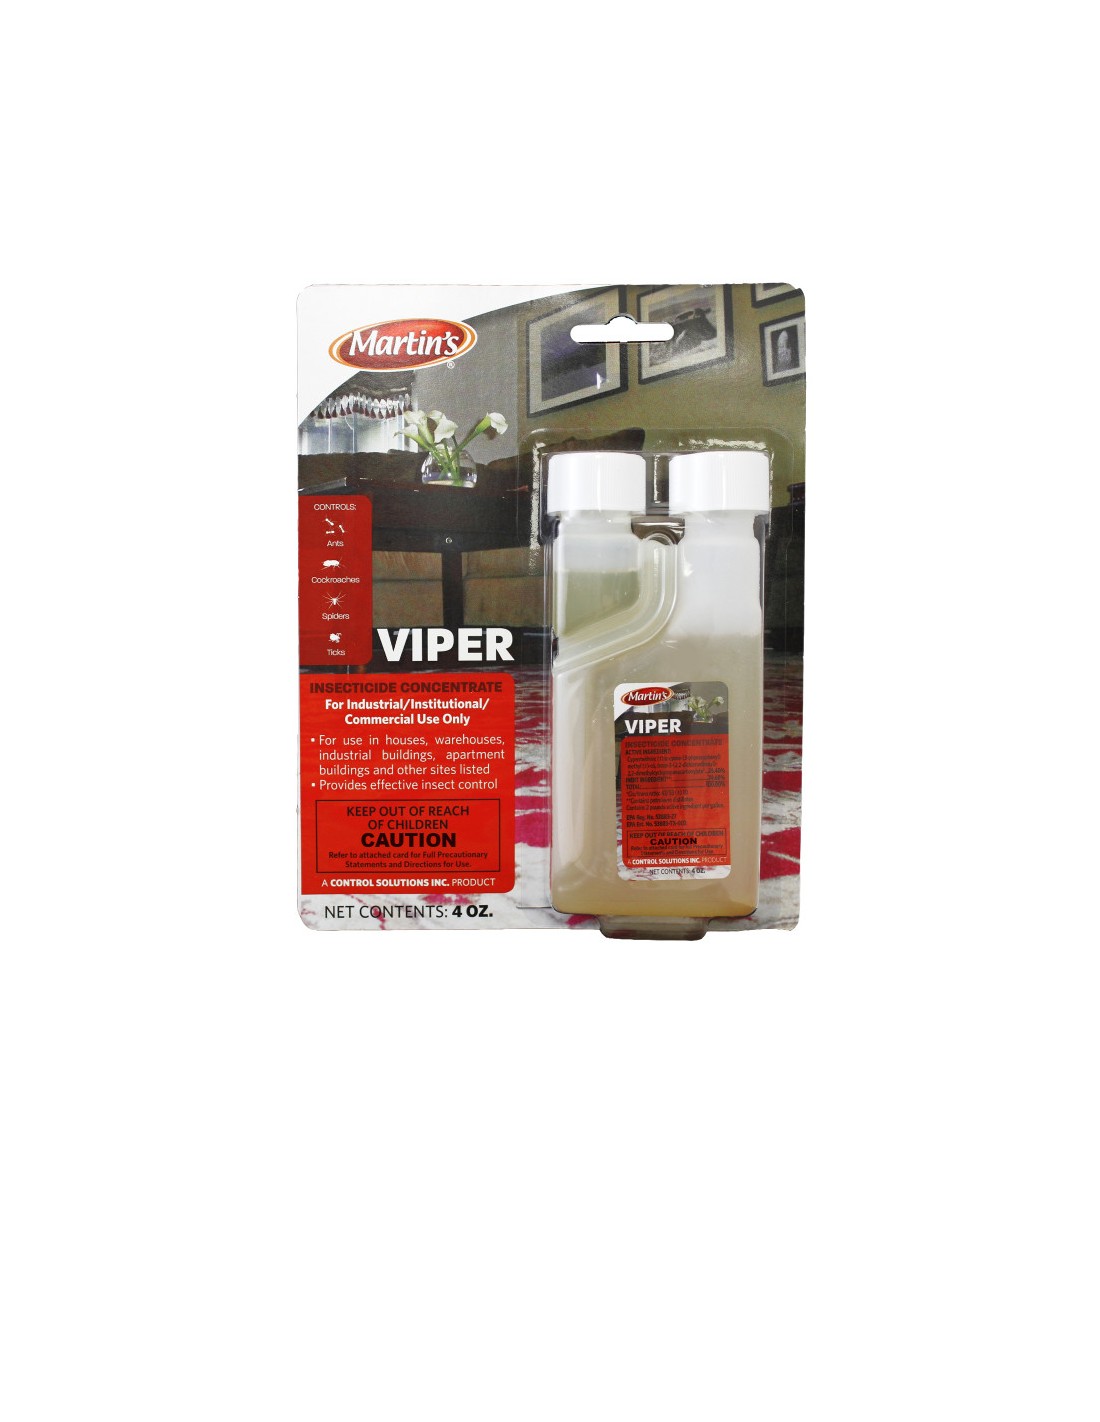 Whats the mixture ratio for viper insecticide AND ig regulator